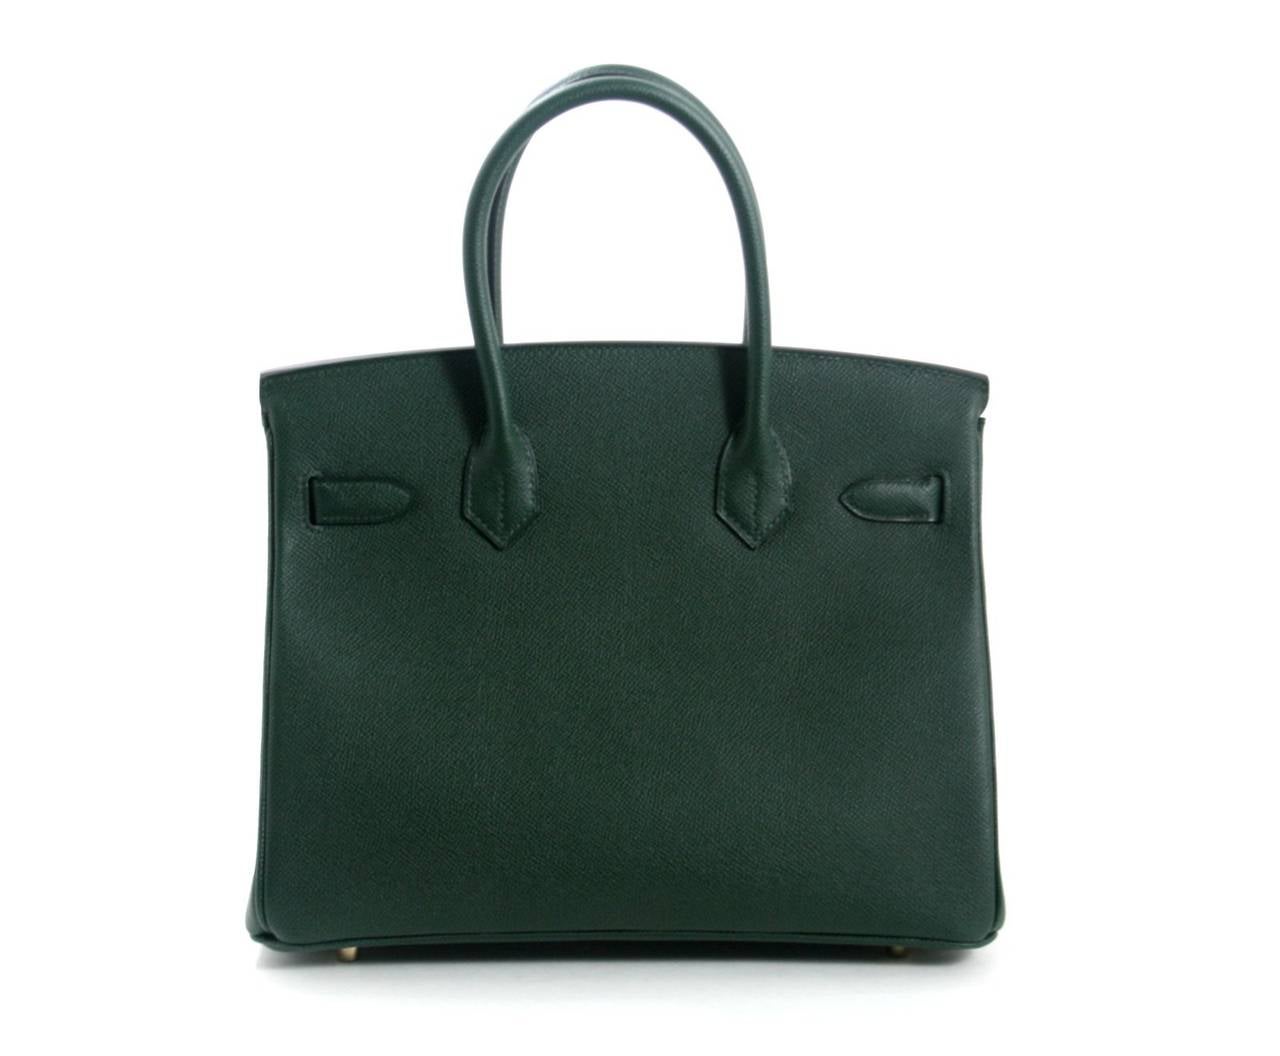 Pristine and never before carried, this Hermès Vert Anglais Epsom Leather 30 cm Birkin is in the newest shade of  green from the 2014-2015 collection.    The protective plastic is intact on all the hardware and it has been carefully stored.   Hermès